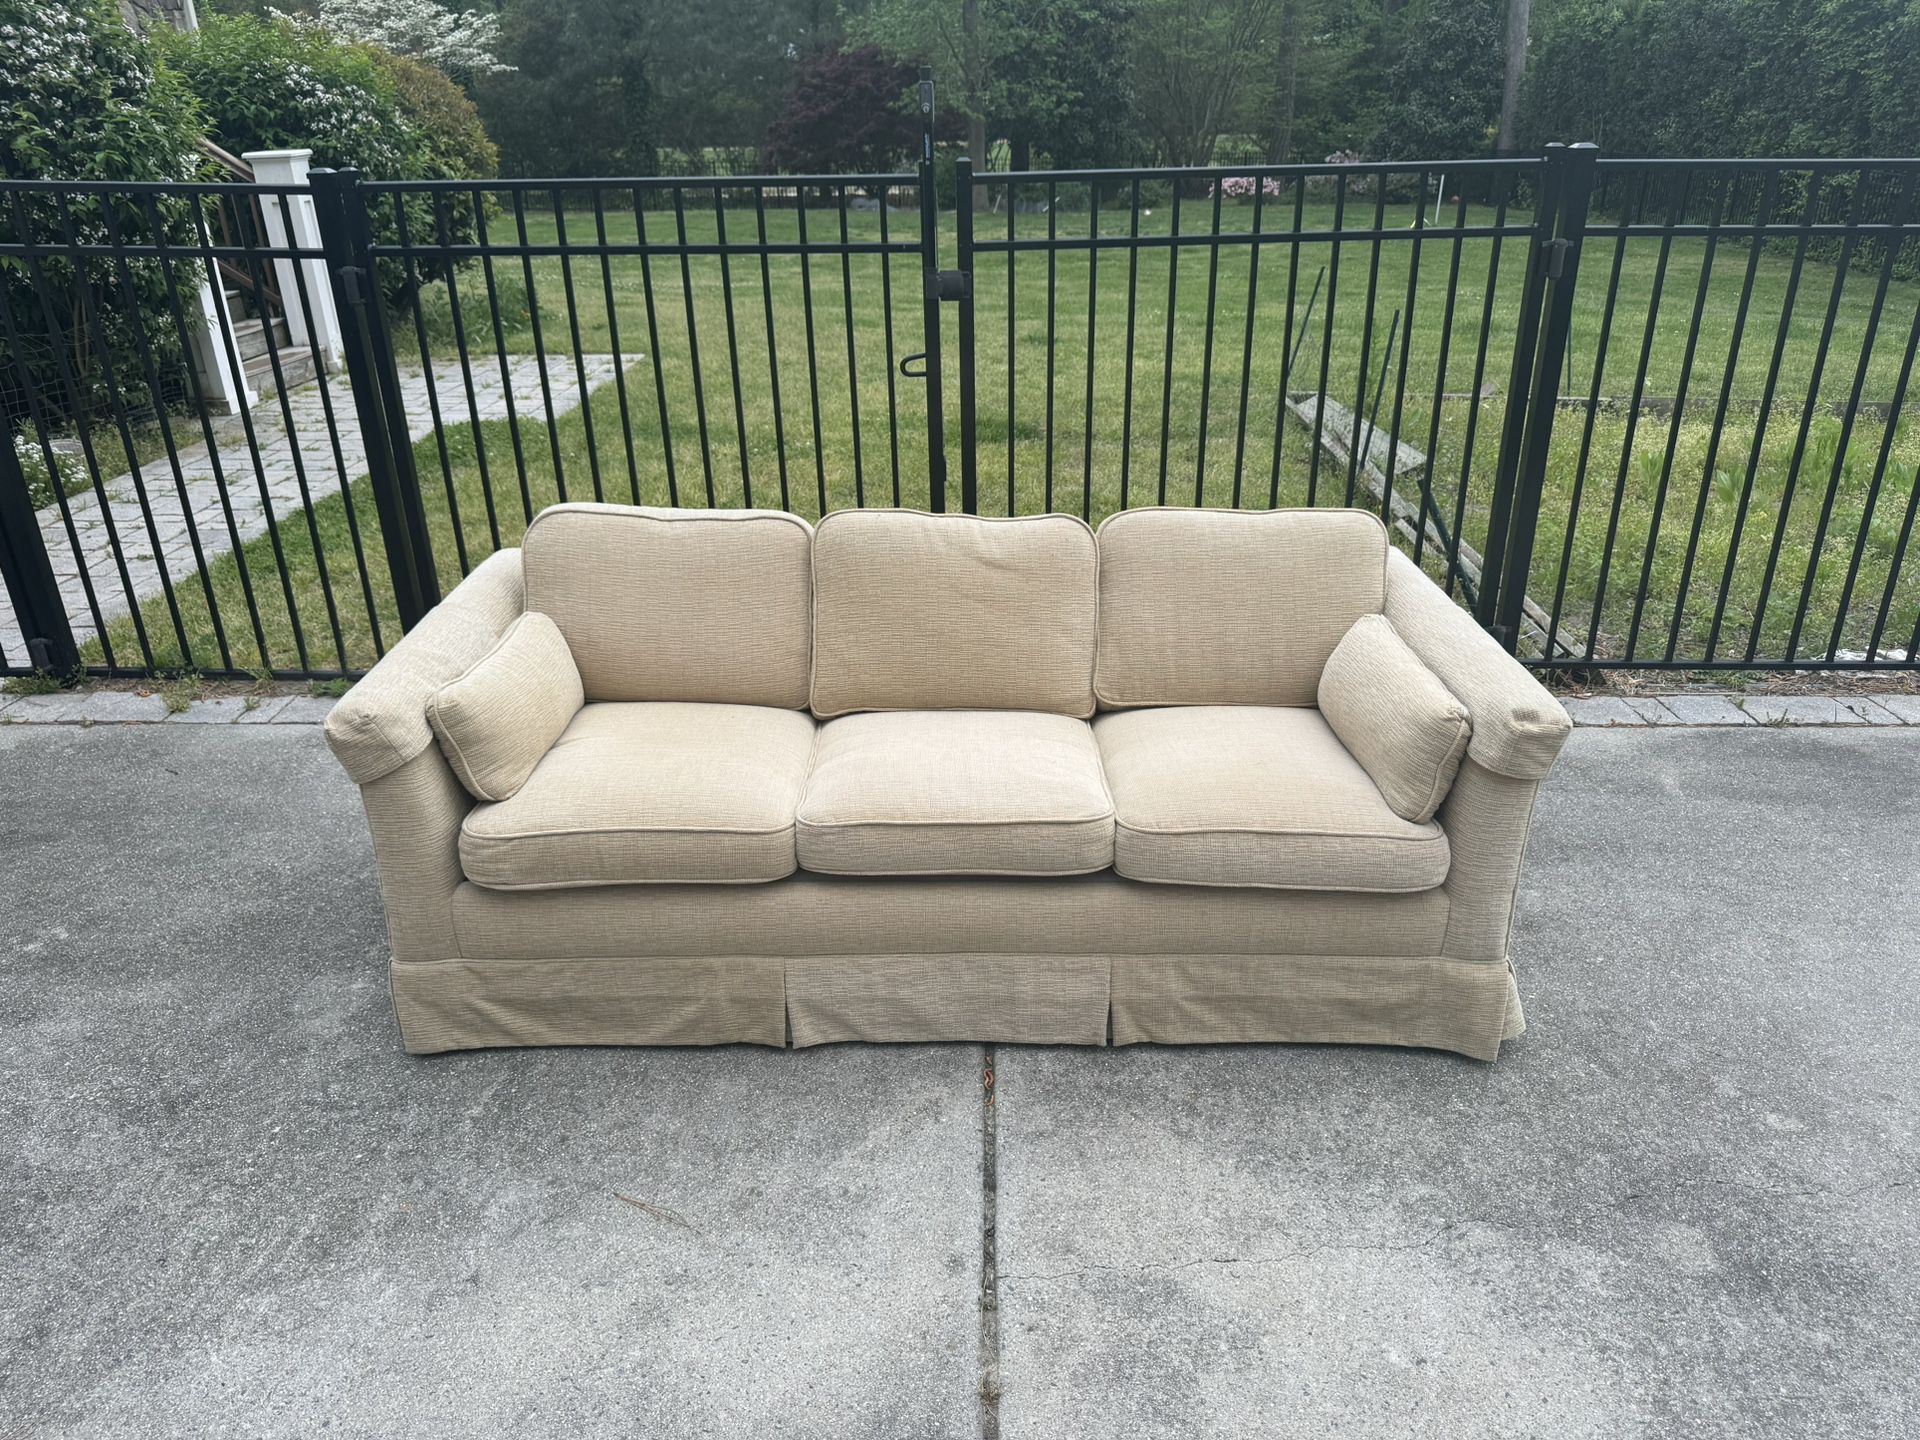 Pull out bed Couch, No damage, Can deliver